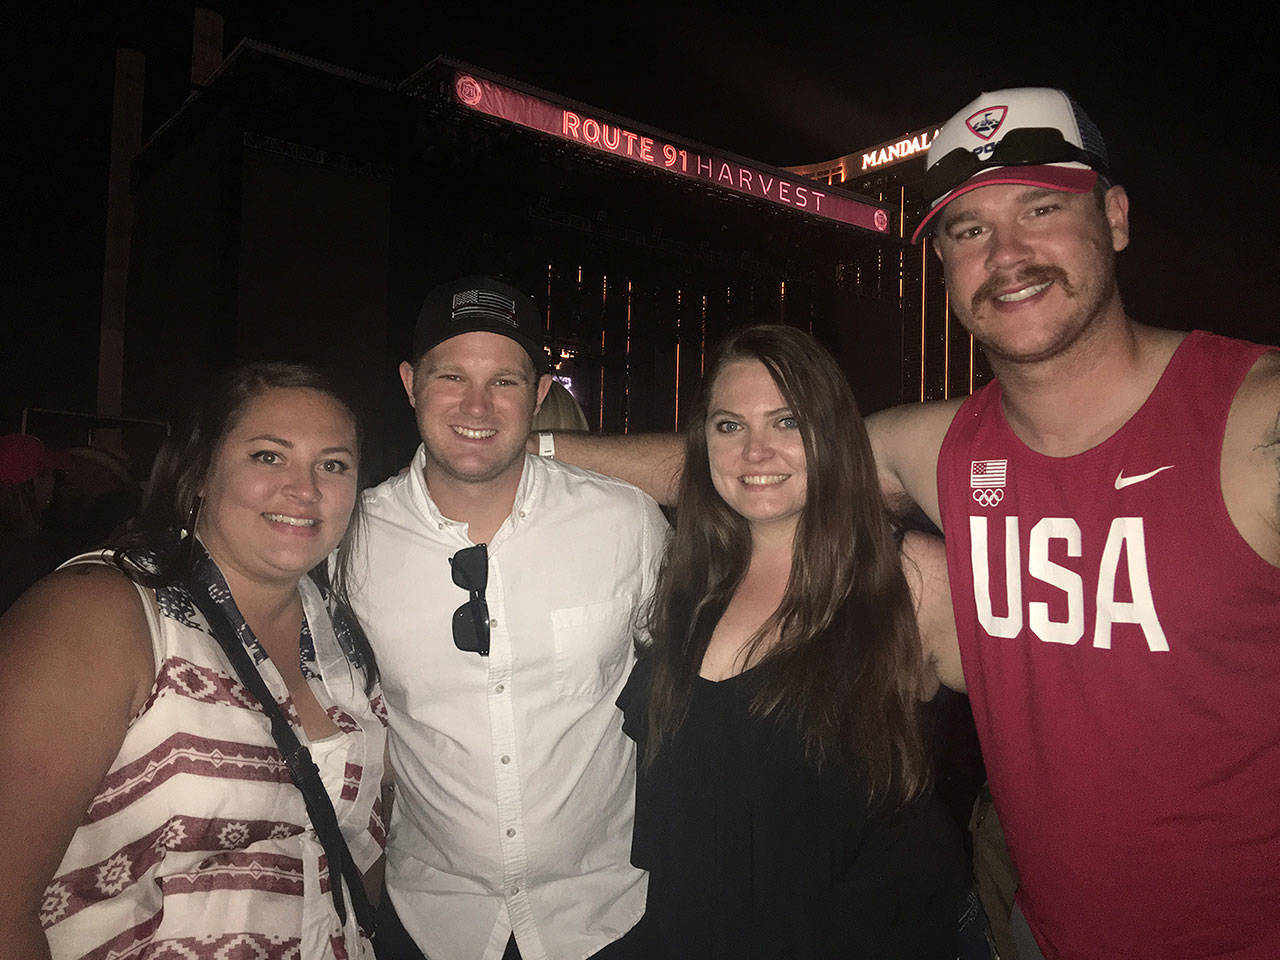 Photo courtesy of Ali Pendergrass. Ali Pendergrass, Nick Pendergrass, Alicia Hounsley and Tyler Hickman pose for a photo outside the Route 91 Harvest music festival, moments before a gunman opened fire on the crowd of concertgoers killing 59 and injuring 527.